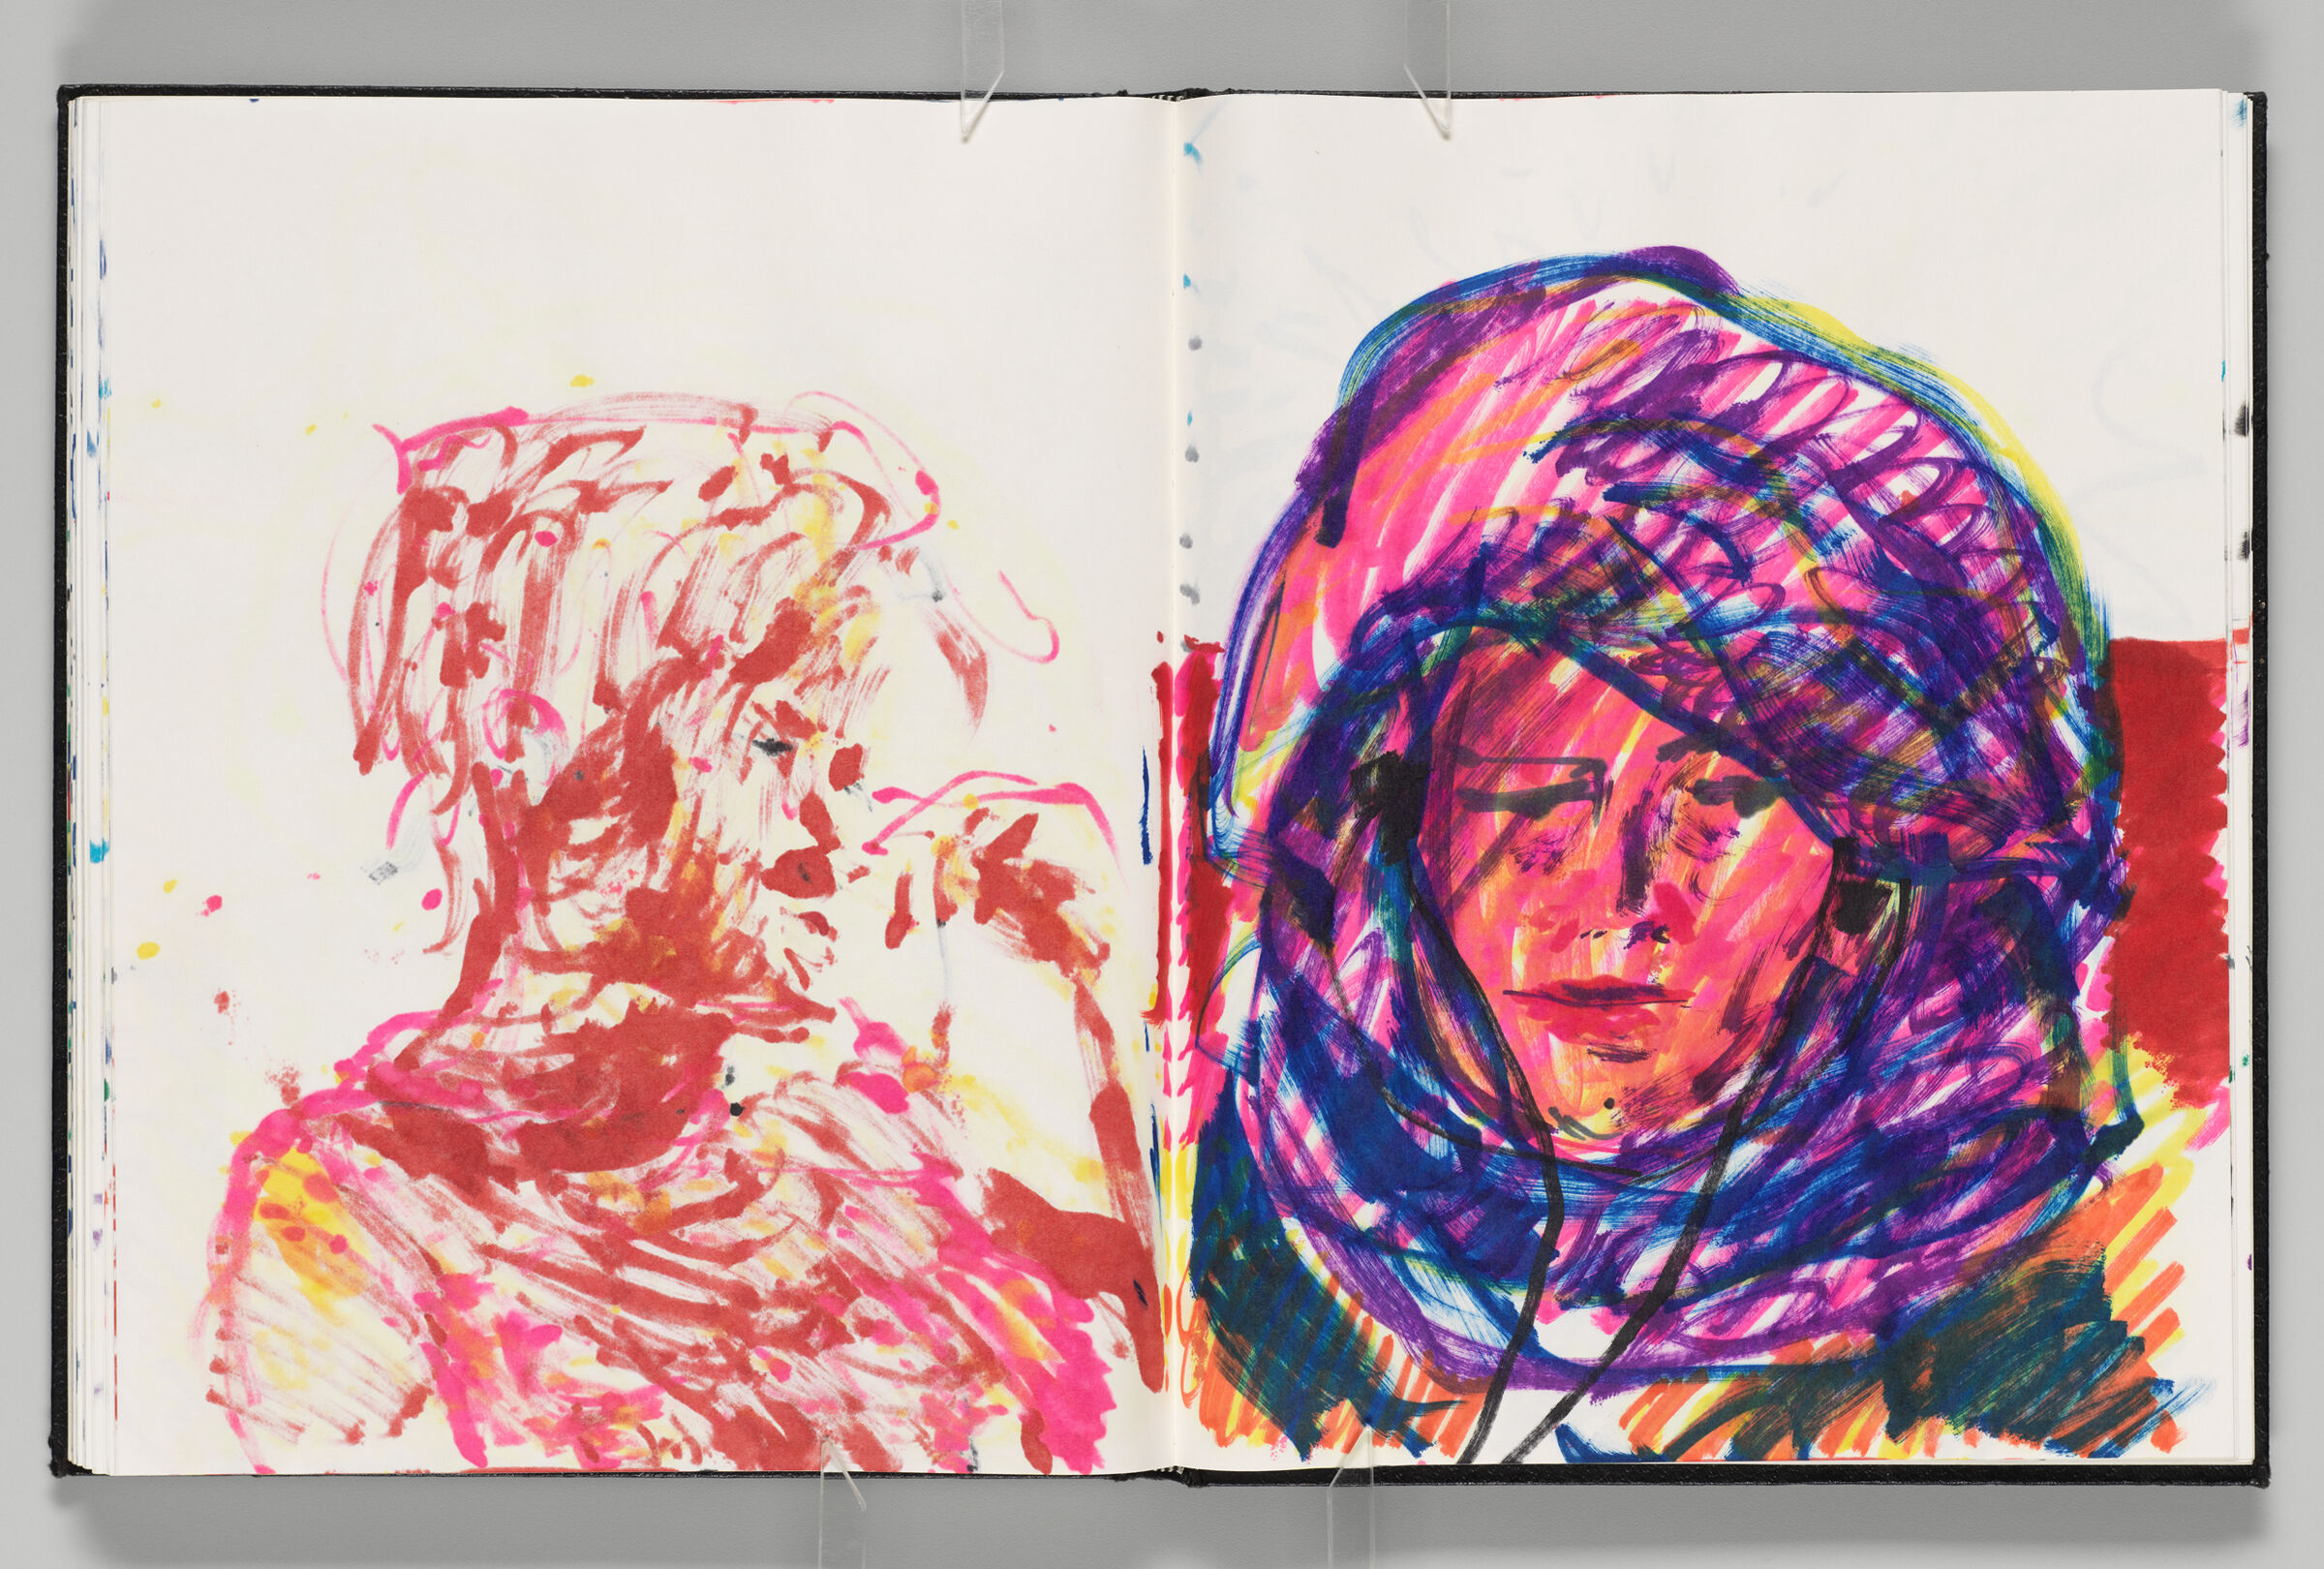 Untitled (Bleed-Through Of Previous Page, Left Page); Untitled (Shrouded Female Figure With Headphones [Elizabeth], Right Page)